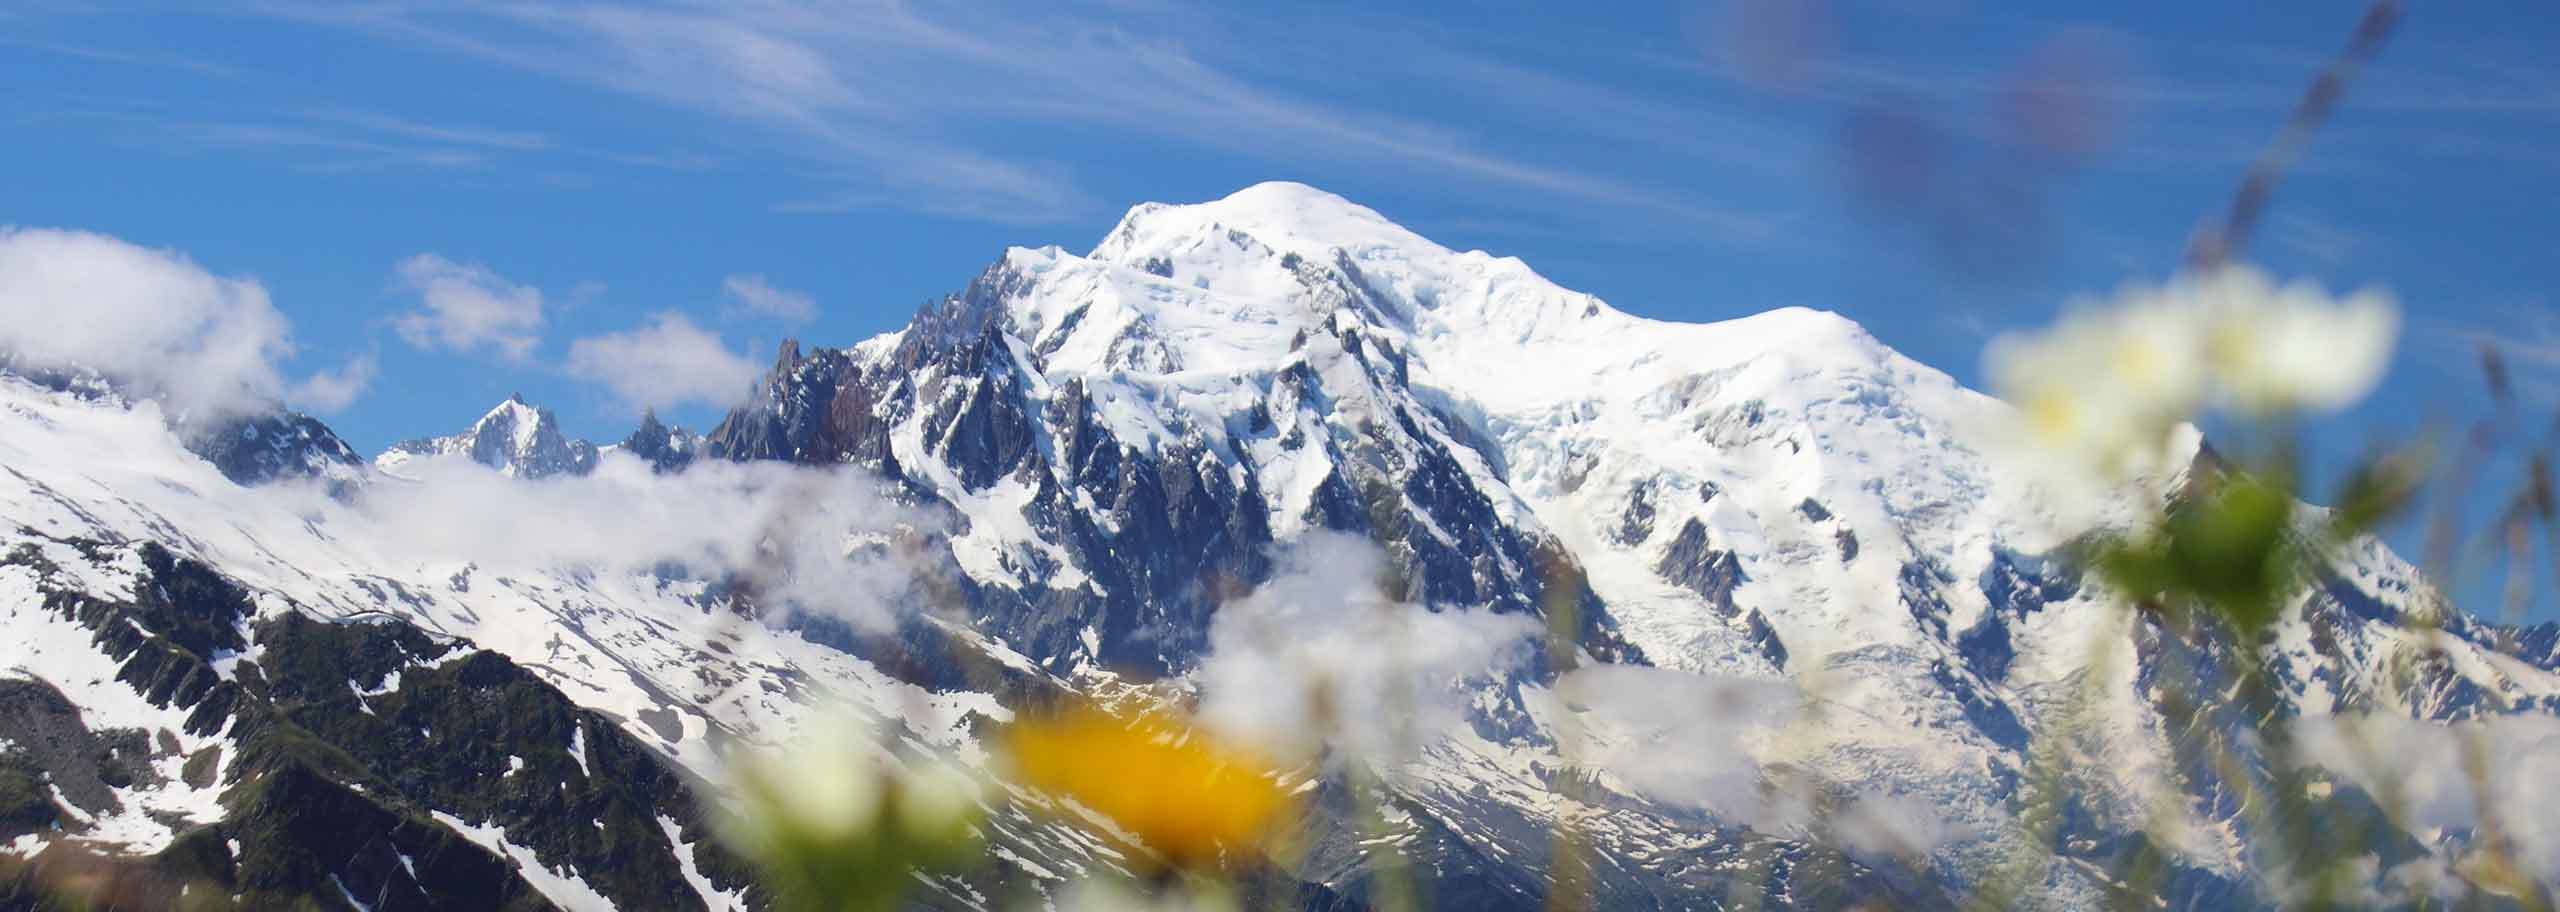 Trekking in Courmayeur Mont Blanc with a Mountain Guide